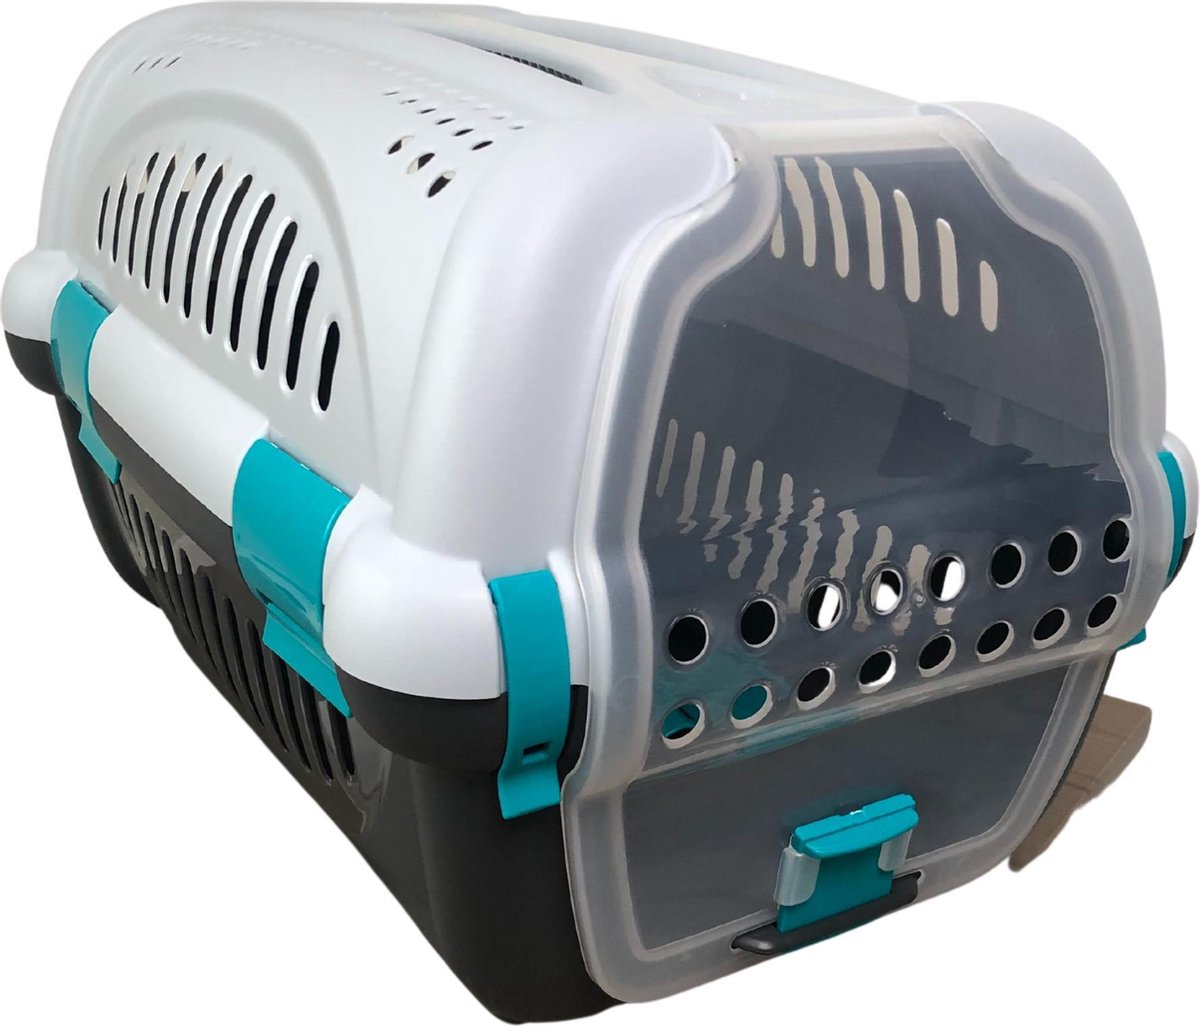 Beeztees Transport Box Rhino for Dogs